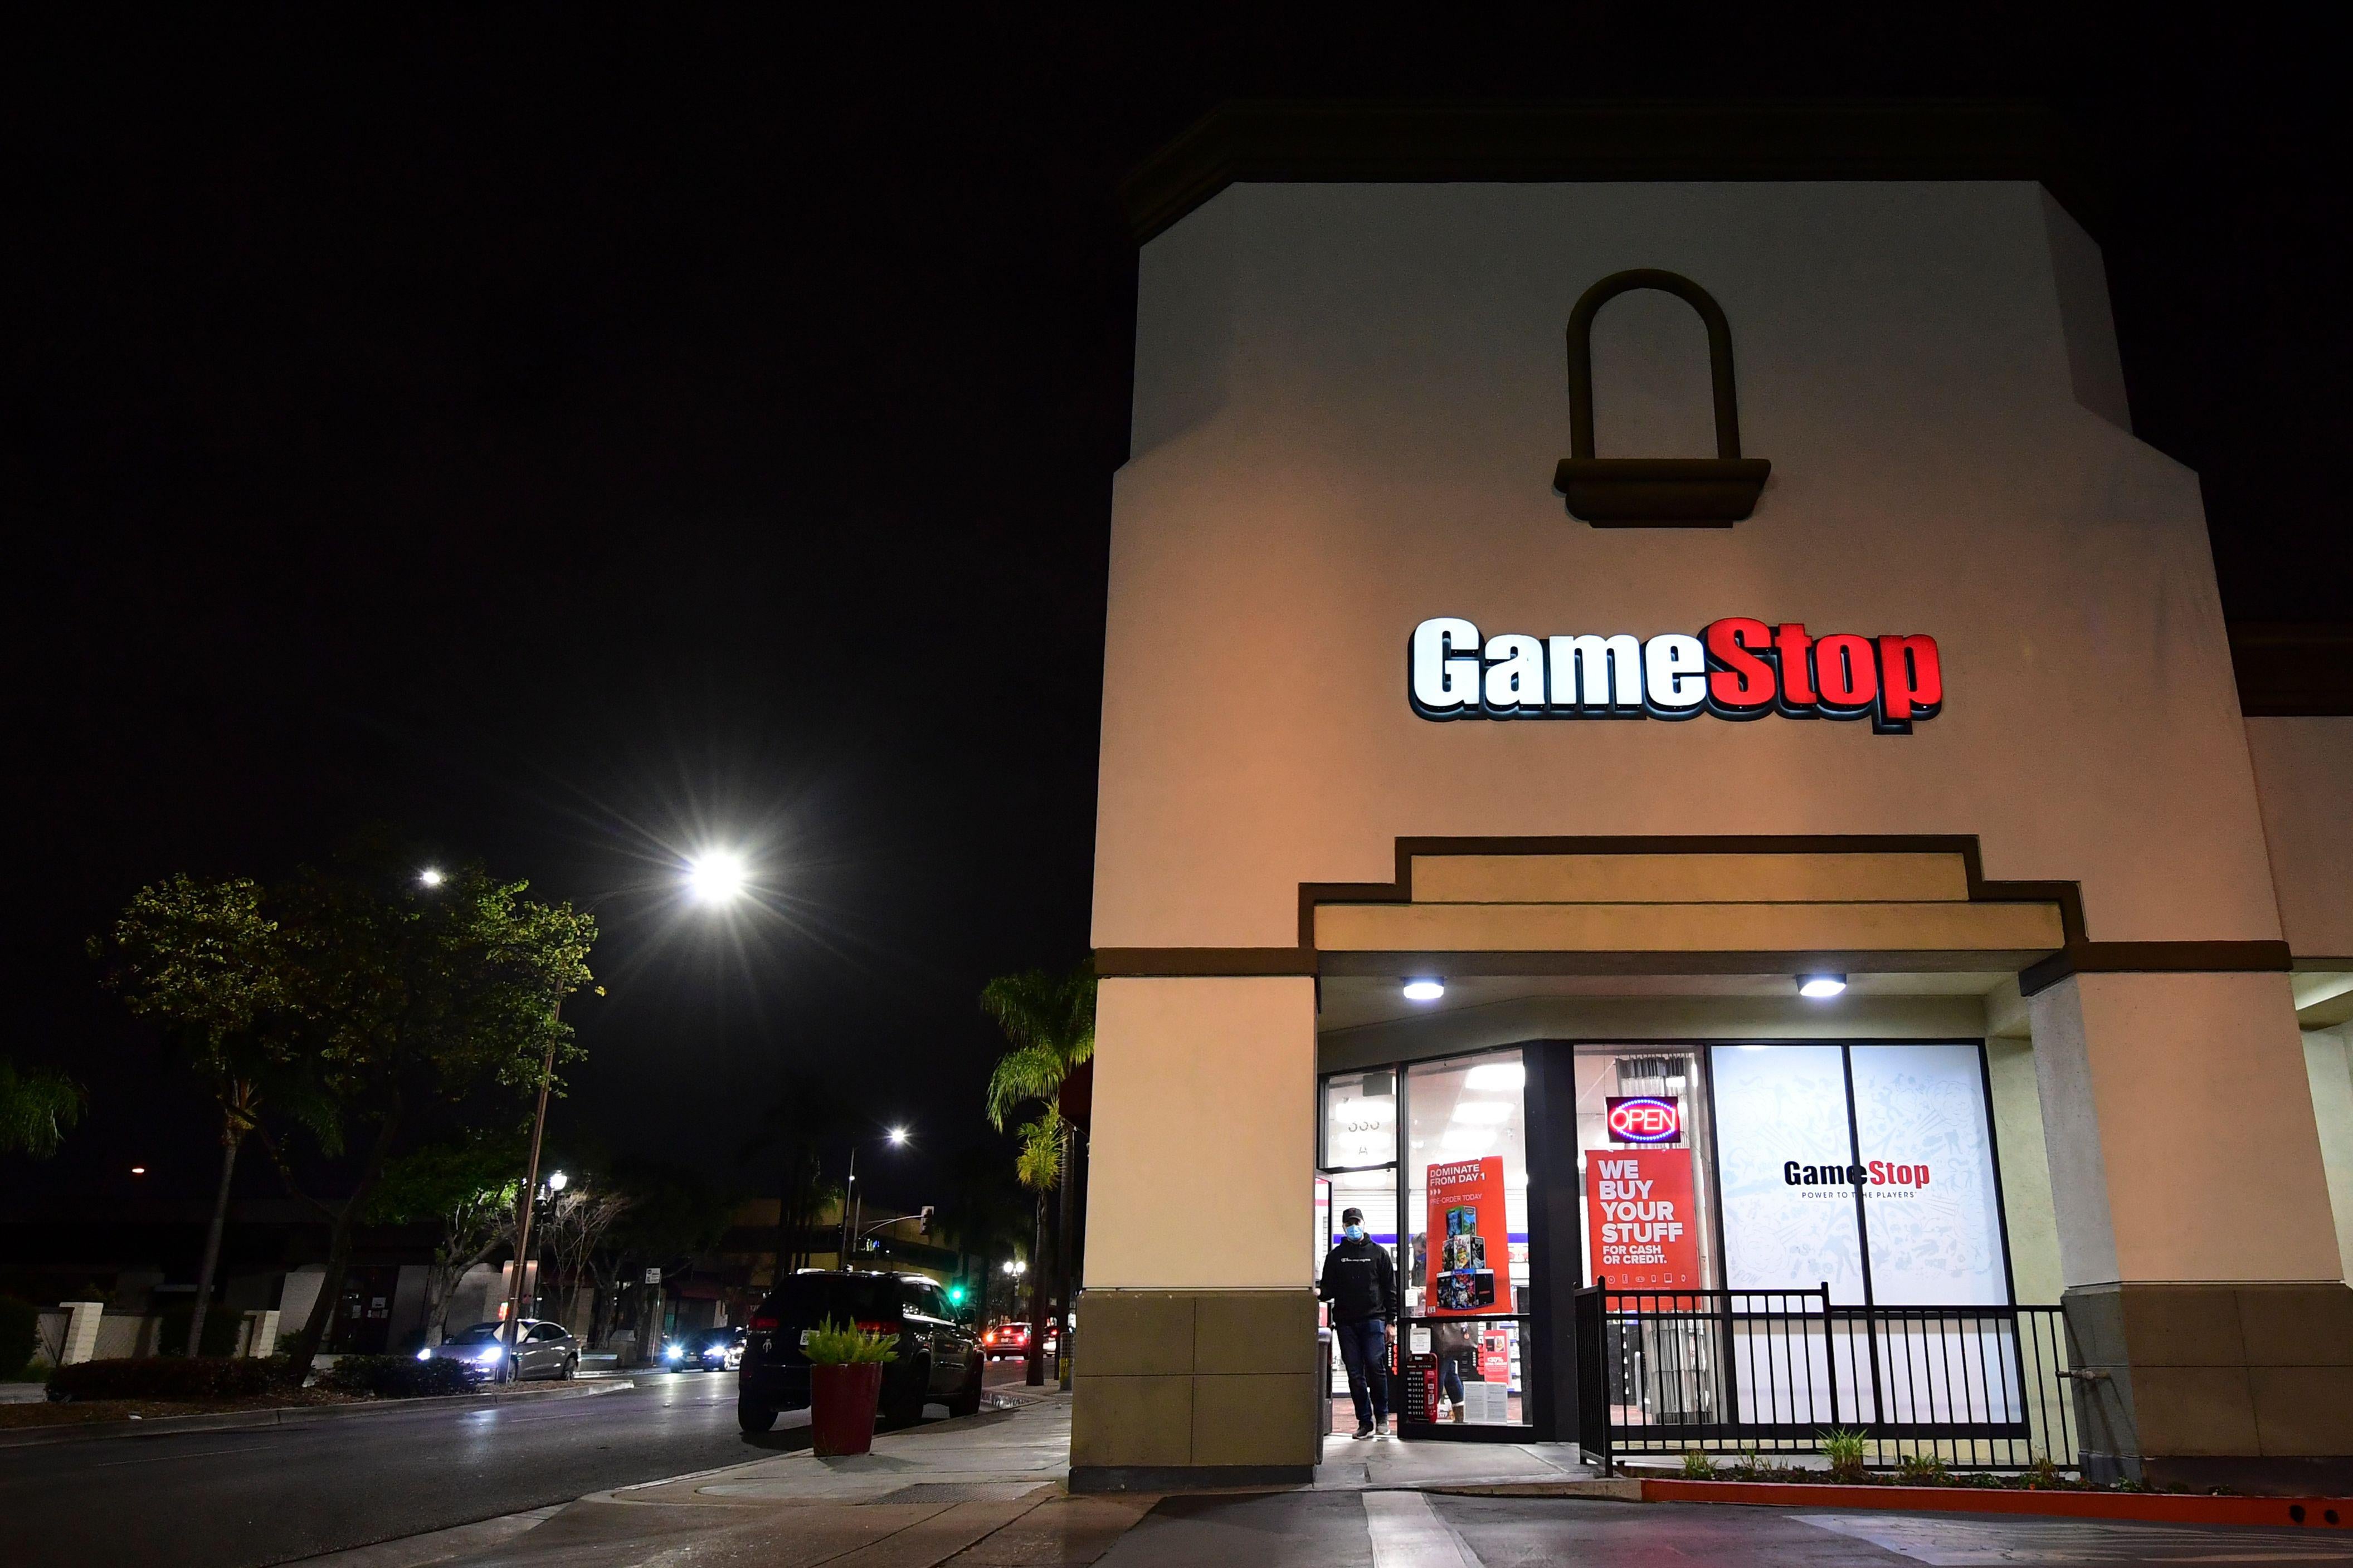 A man stands outside a GameStop store at night.